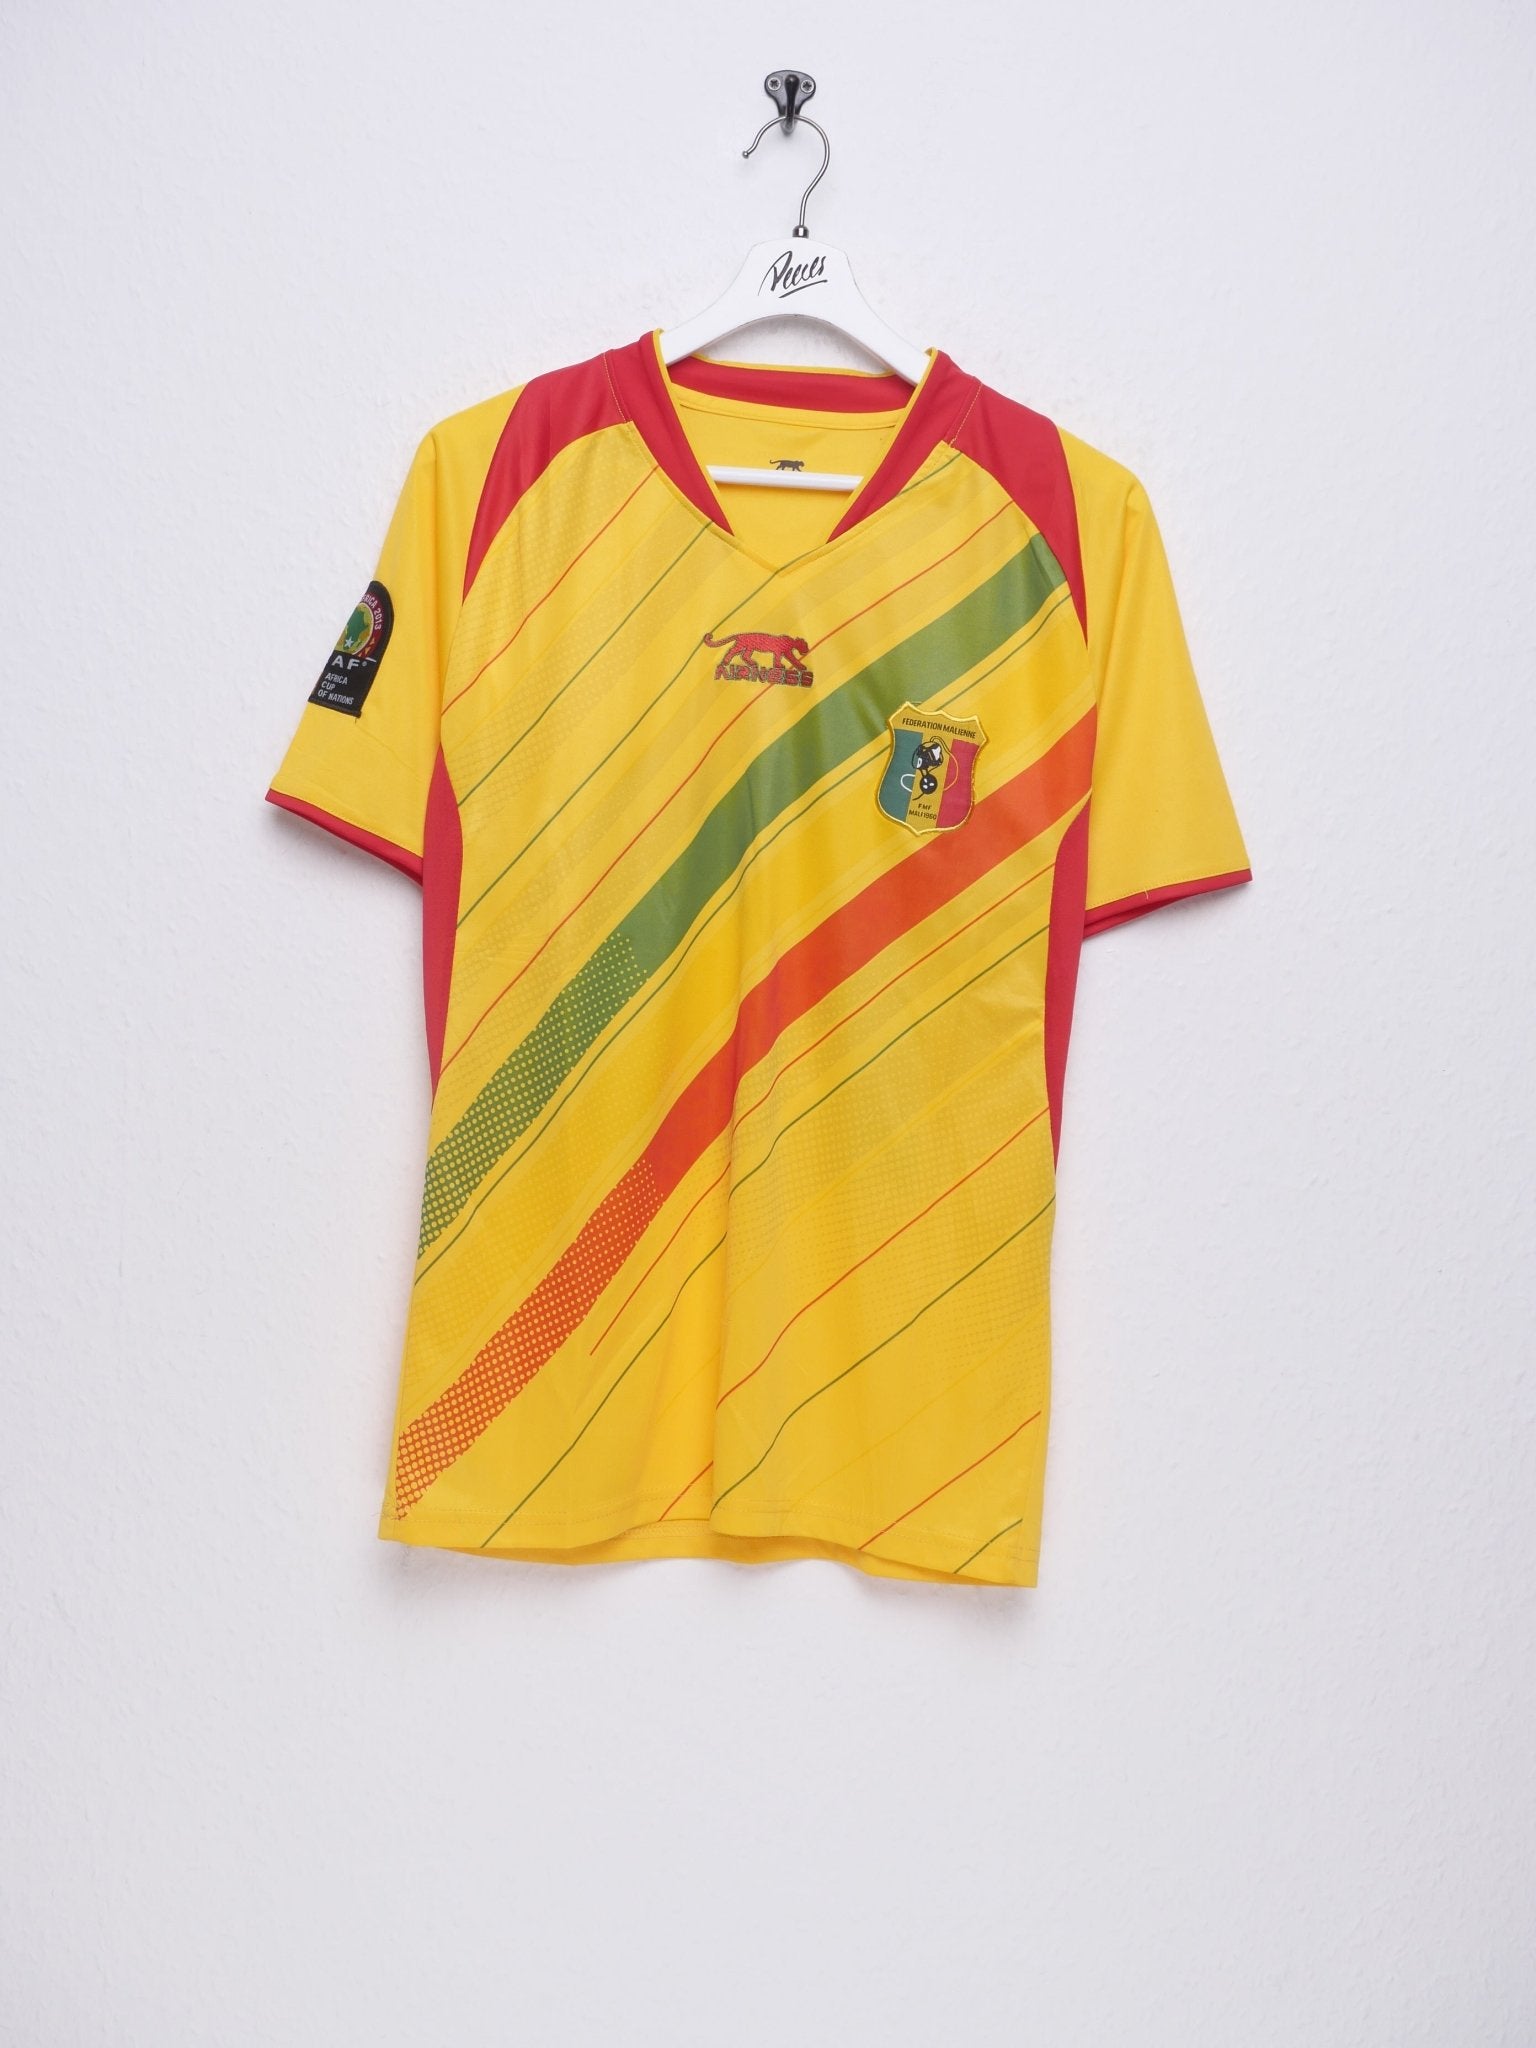 Airness Africa Cup of Nations 2013 Federation Malienne Gio embroidered Logo Soccer Jersey Shirt - Peeces